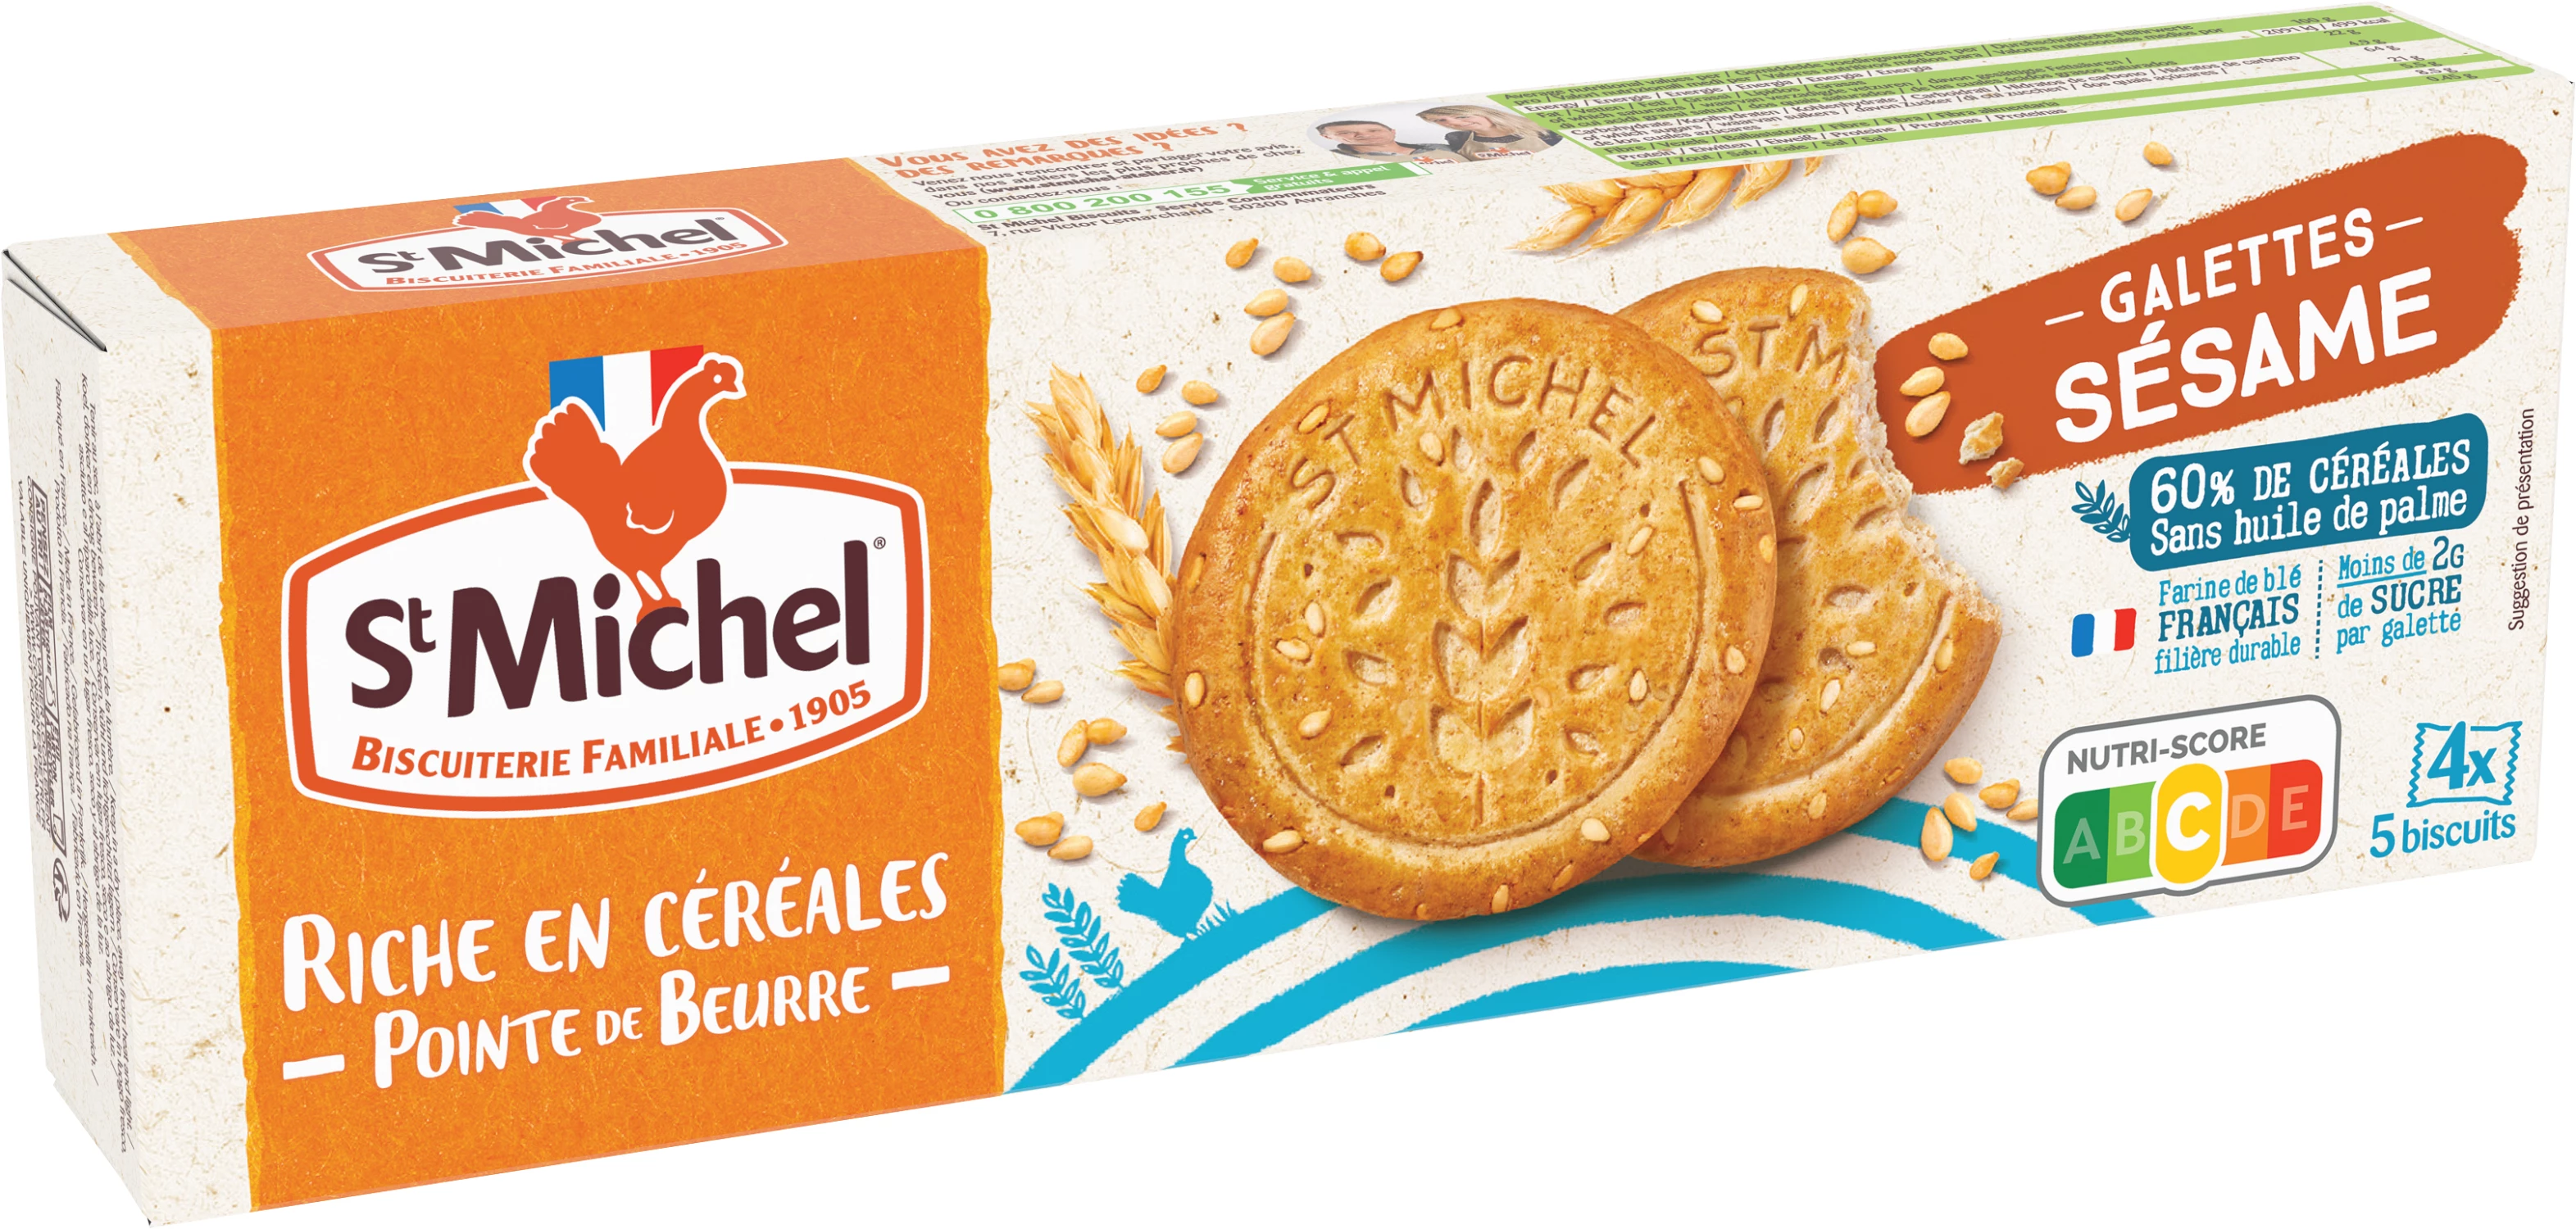 Sesame Cereal Cakes X4 14 - ST MICHEL